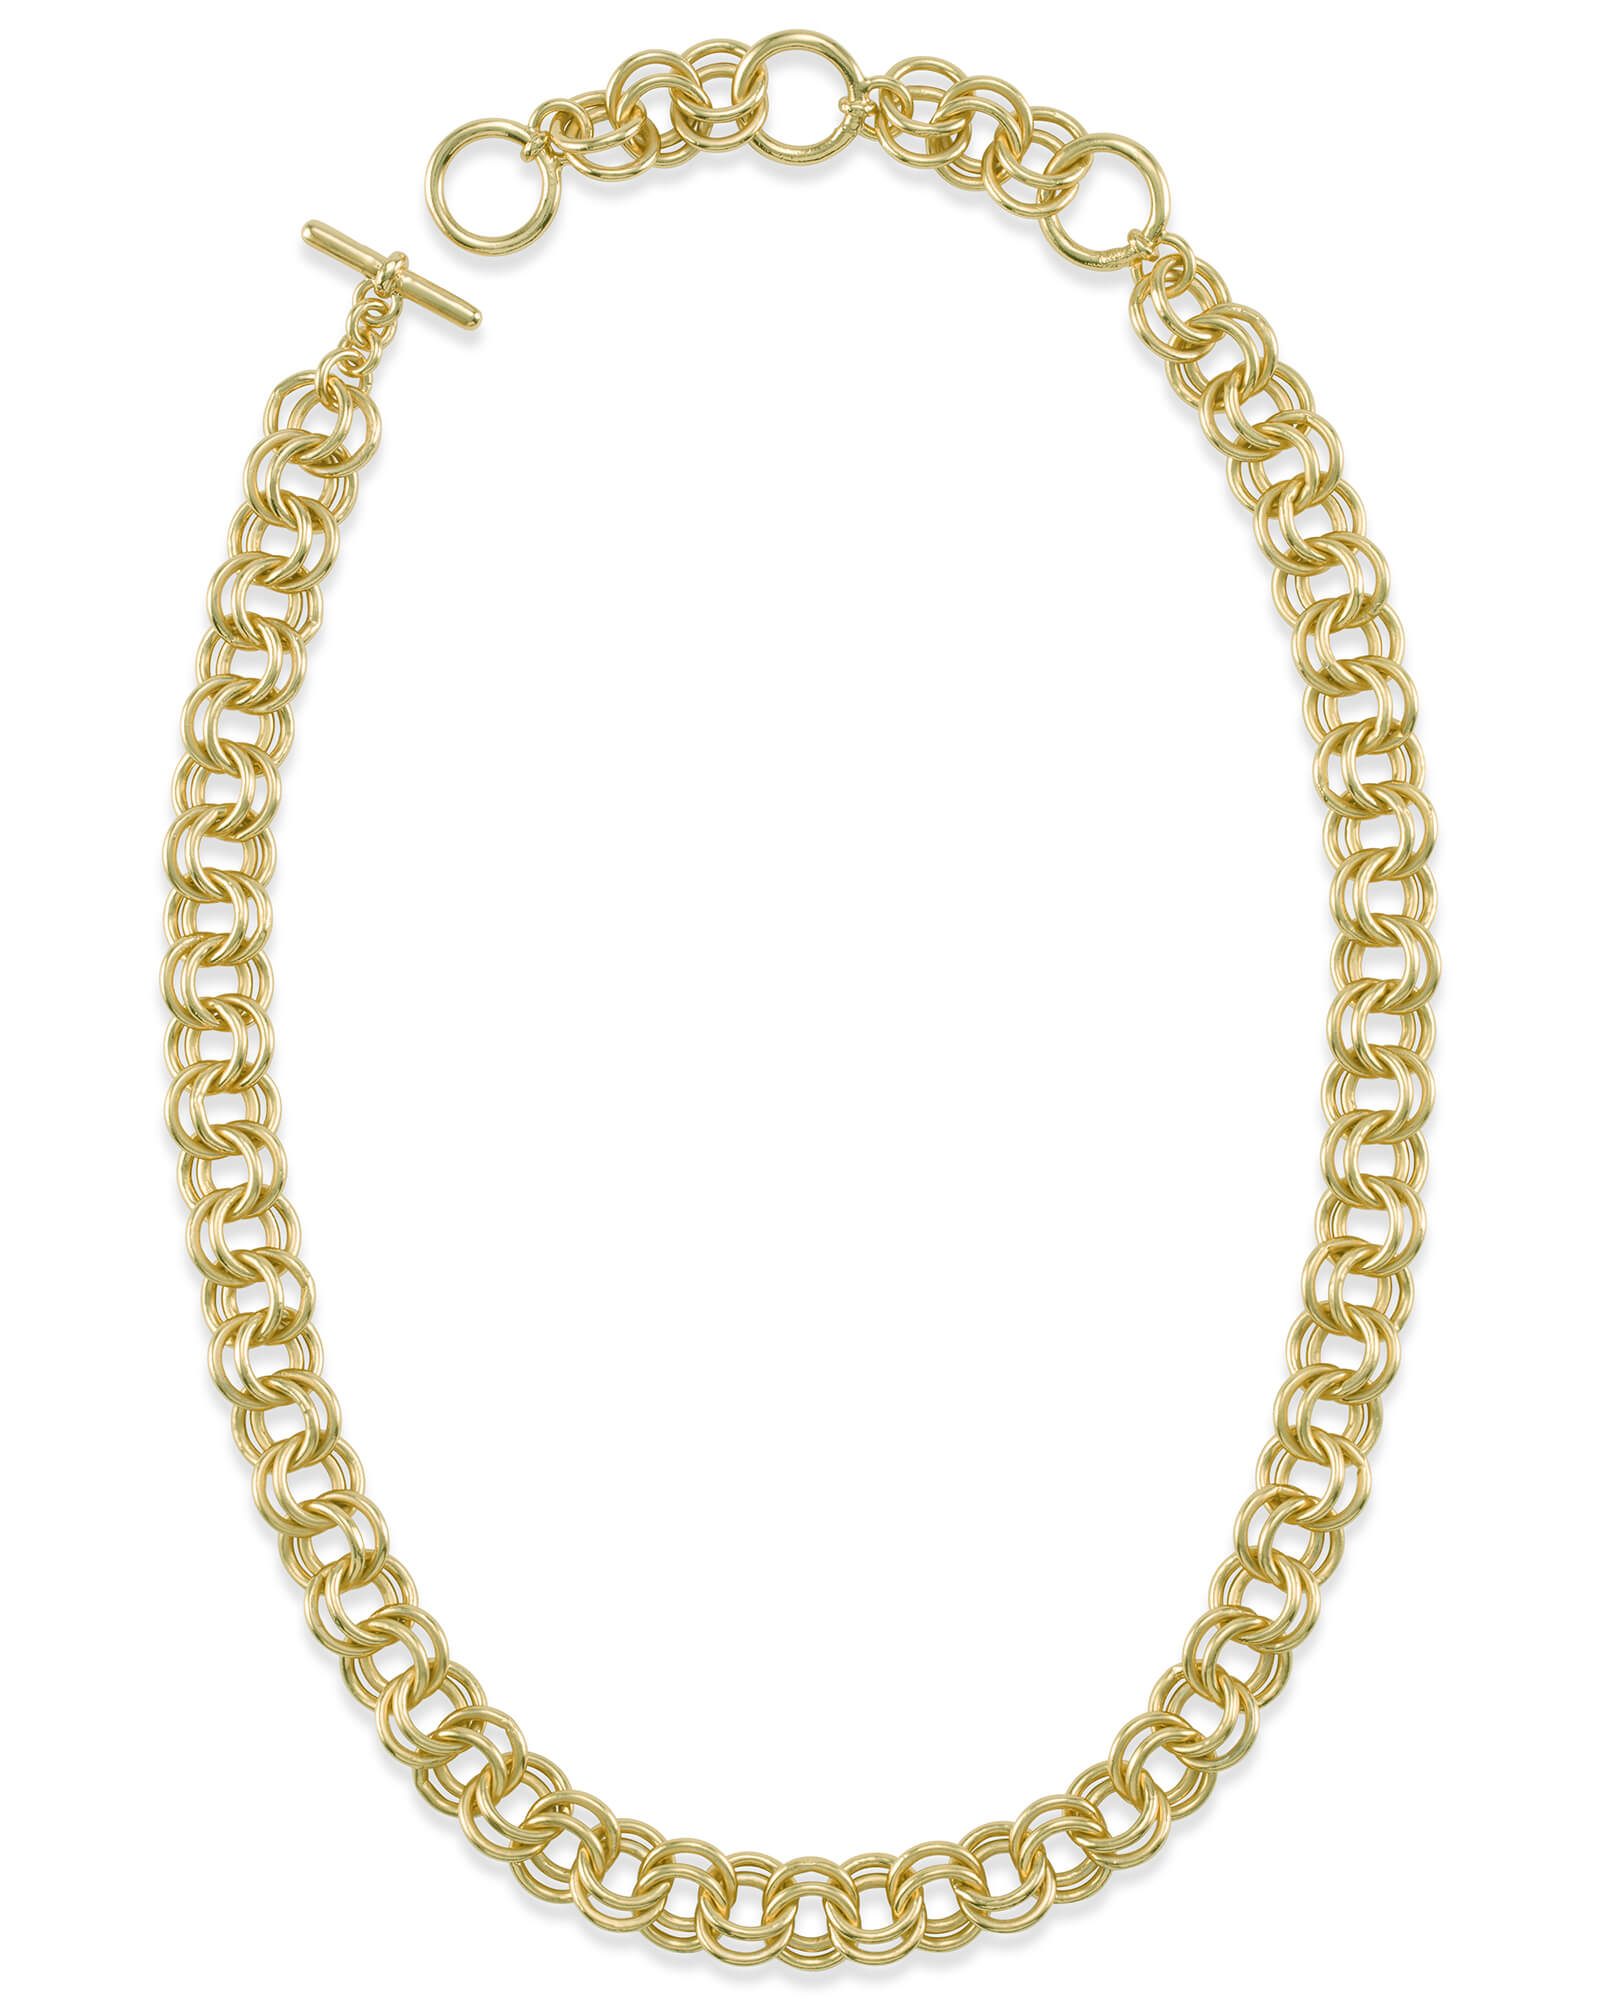 Kendra Scott 18 Inch Double Chain Link Necklace in Gold | Plated Brass